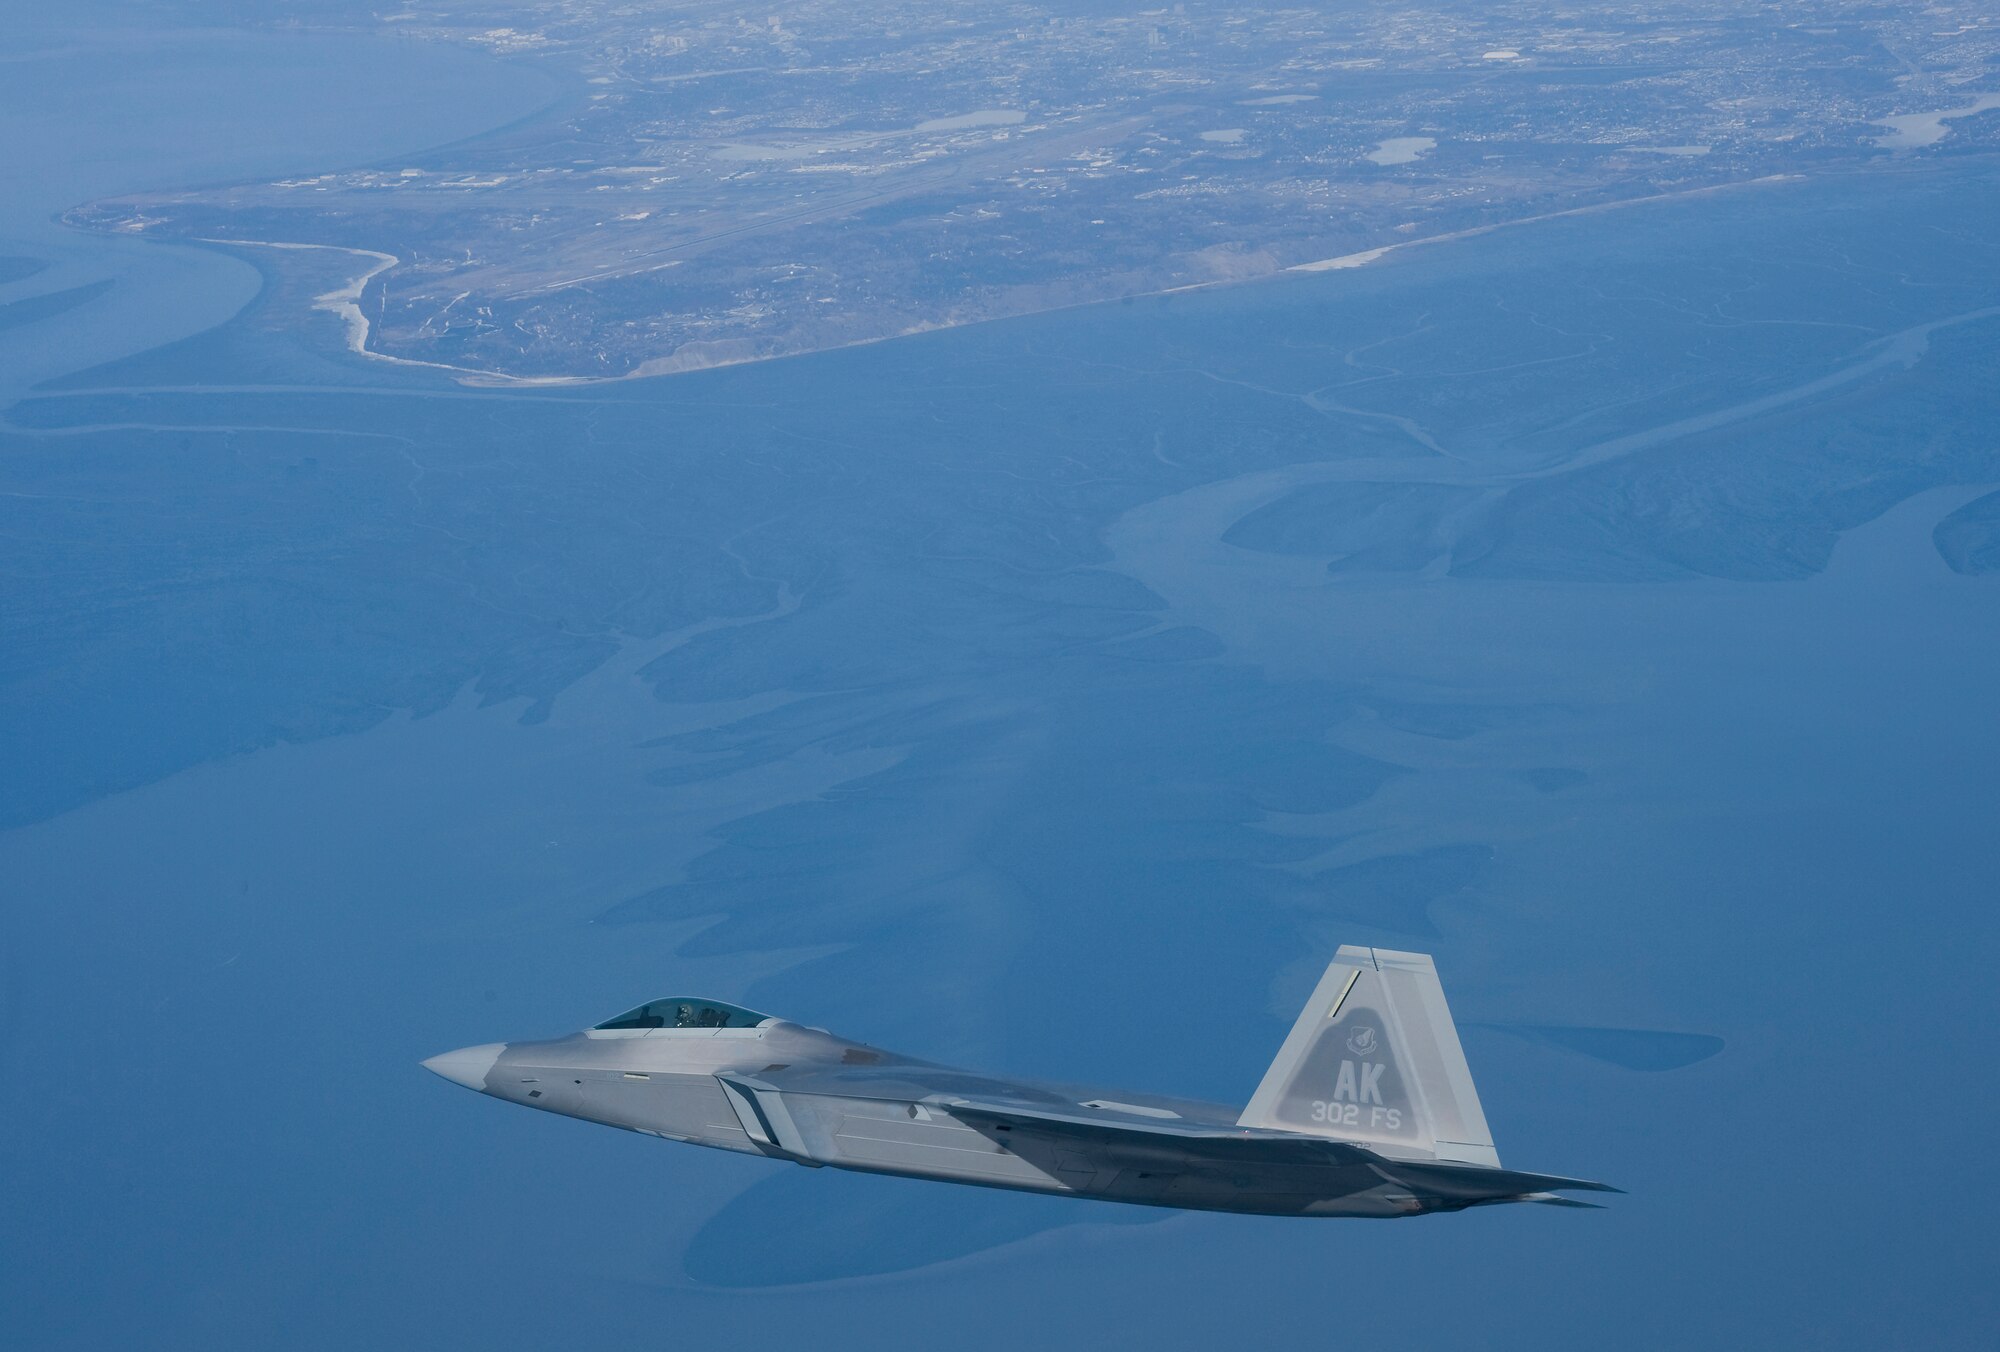 An F-22 Raptor flies above the Anchorage skyline during a routine training mission. This F-22 represents Air Force Reserve Command's first F-22 Associate Unit located at Elmendorf Air Force Base, Alaska. The 302nd Fighter Squadron stood up in October 2007 and belongs to the 477th Fighter Group. (U.S. Air Force photo/ Tech. Sgt. Keith Brown)